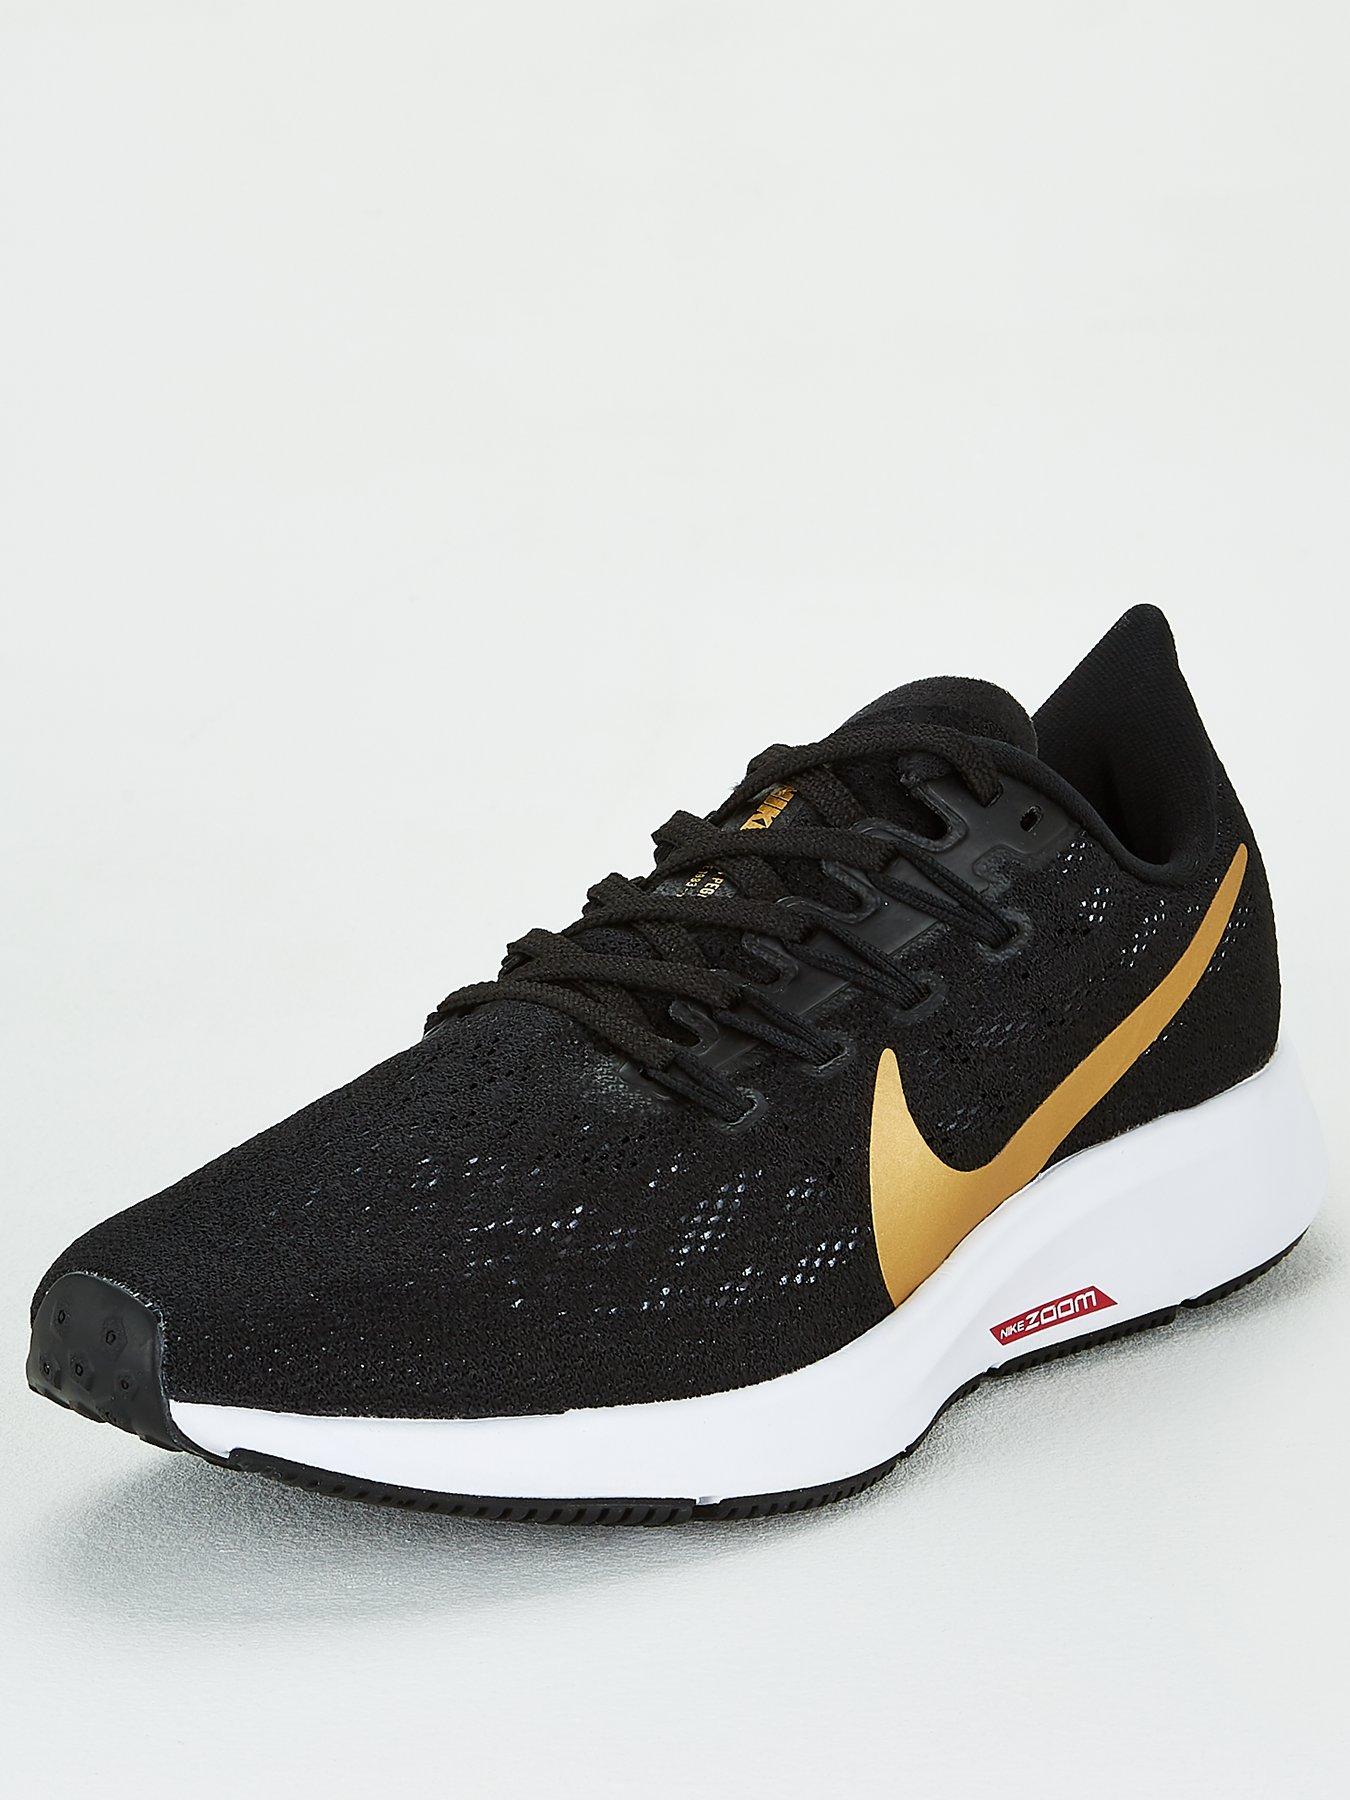 nike running pegasus 36 trainers in black with gold swoosh